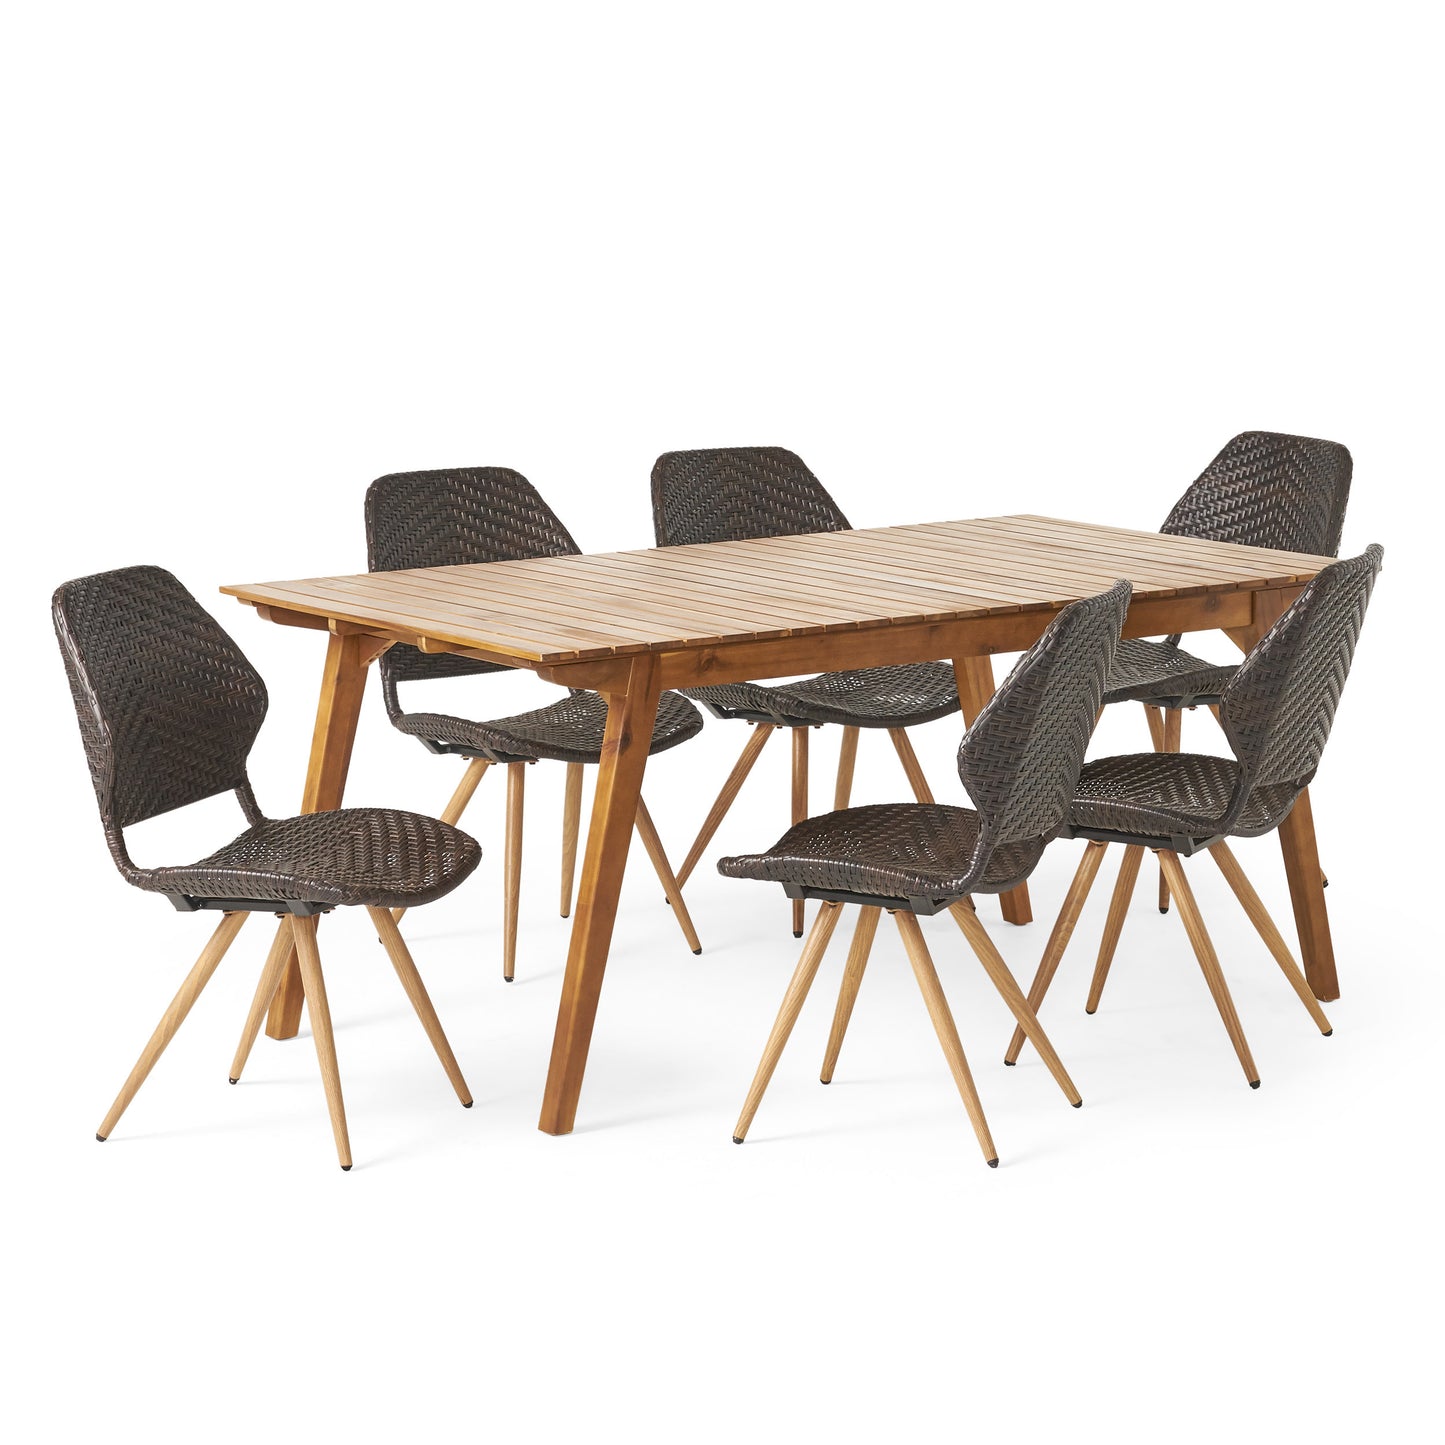 Kevin Outdoor 7 Piece Acacia Wood and Wicker Dining Set, Teak and Multibrown